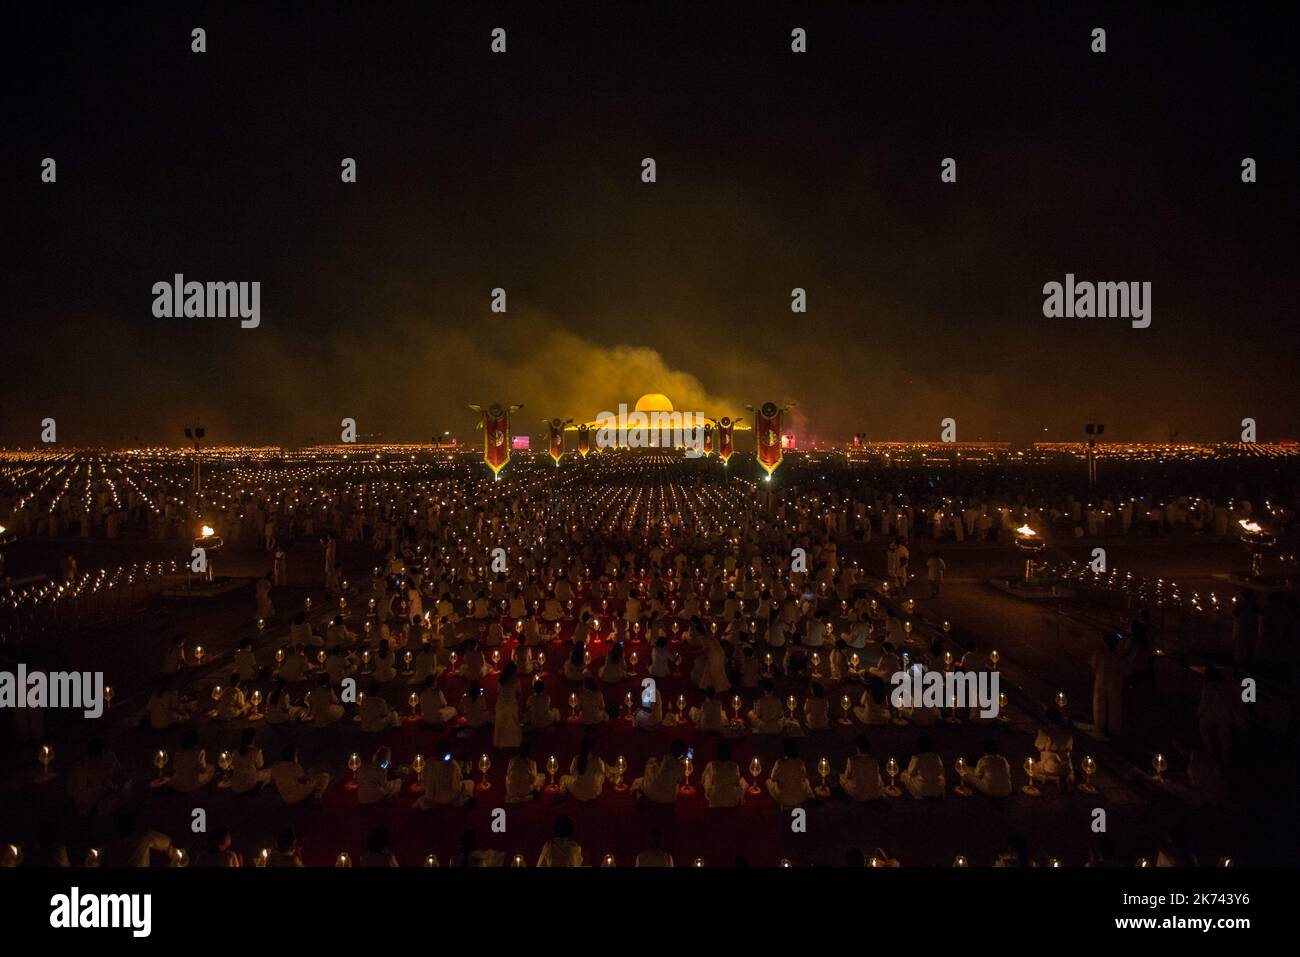 A general view of the Wat Phra Dhammakaya Temple during the yearly ceremony at in the north of Bangkok, Thailand on February 11, 2016. Thai people celebrate the buddhist festival of clockwise circumambulation and Makha pratipa lantern lighting ceremony at Dhammakaya Temple on 'Makha Bucha Day' during the third lunar moon, where around 1250 monks gathered to be ordained by the Buddha. Stock Photo